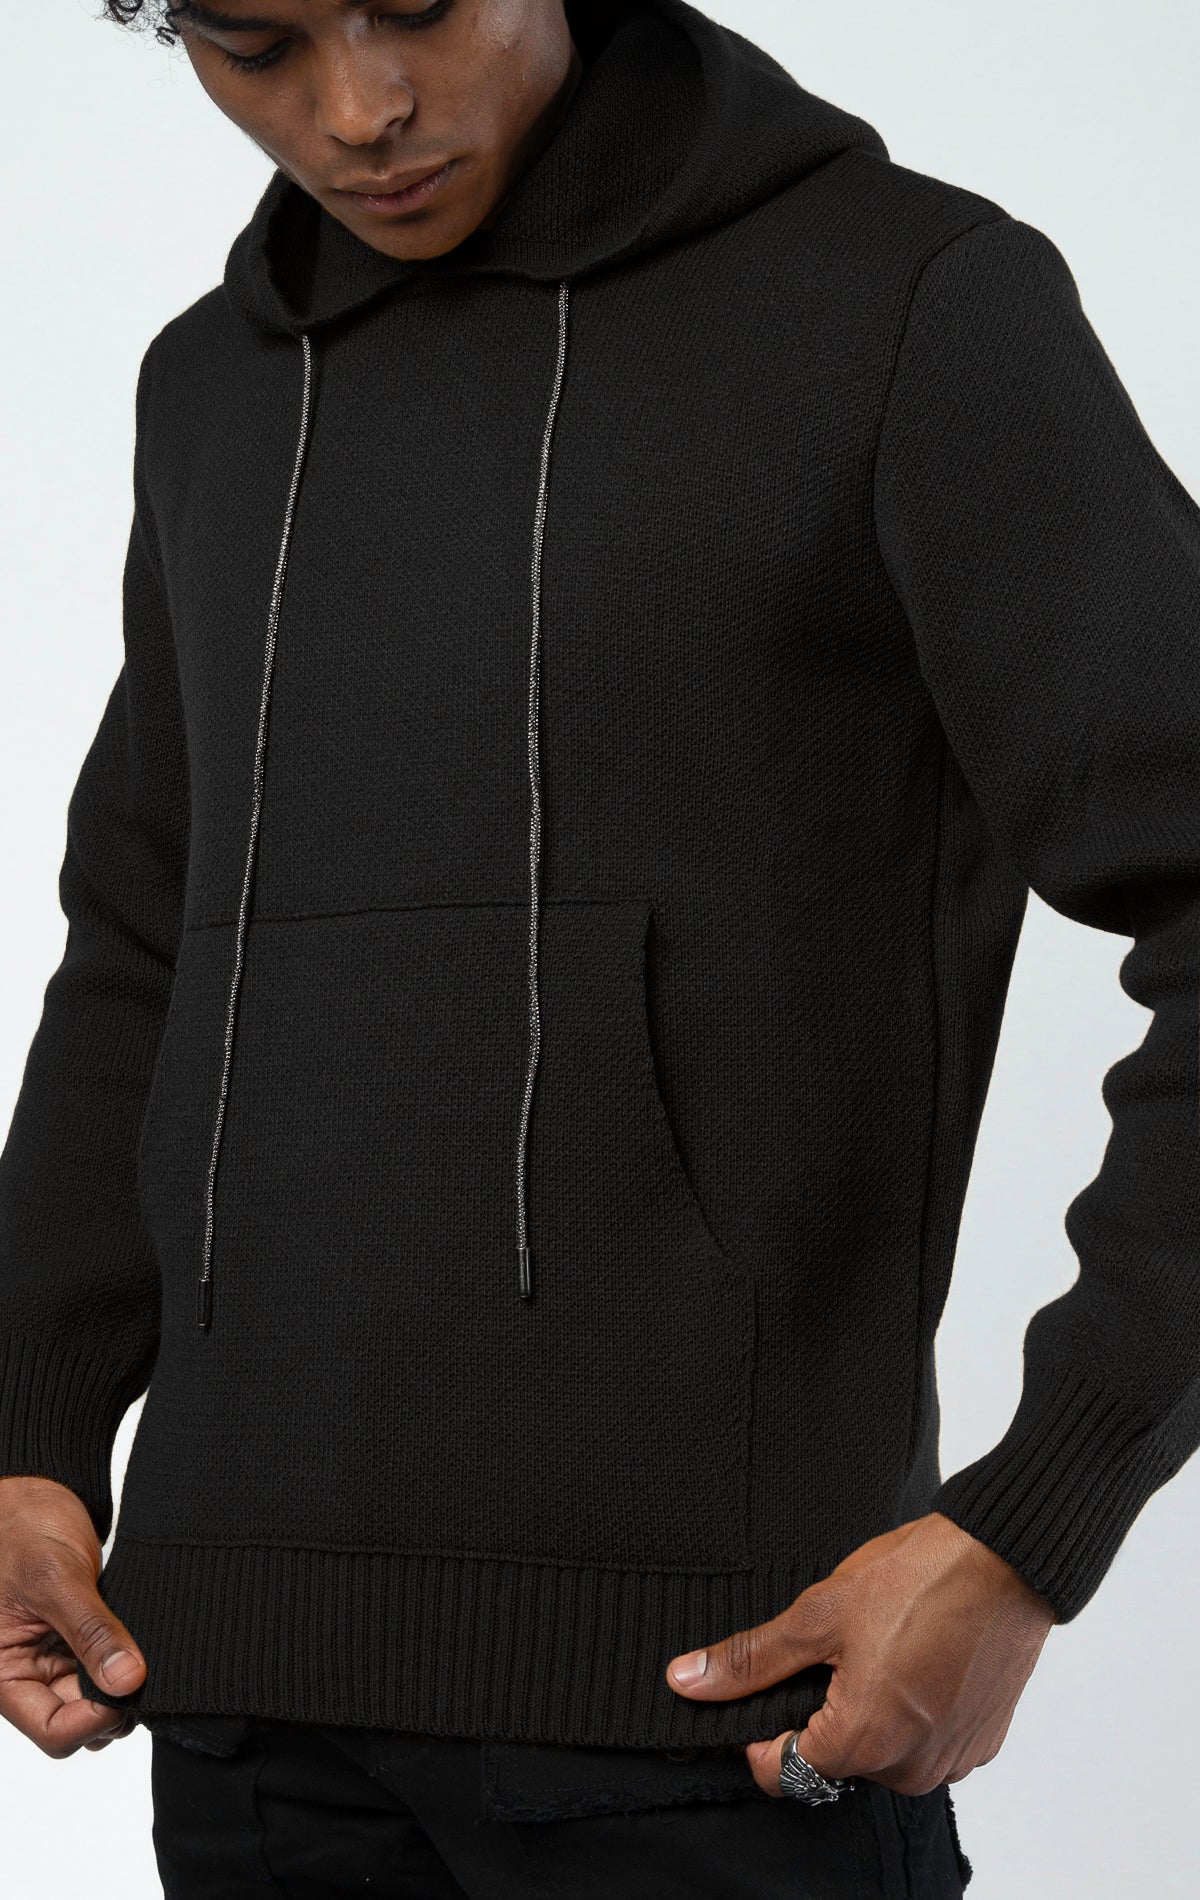 bLACK Luxury sweater hoodie with crystal strings in wheat and black color.